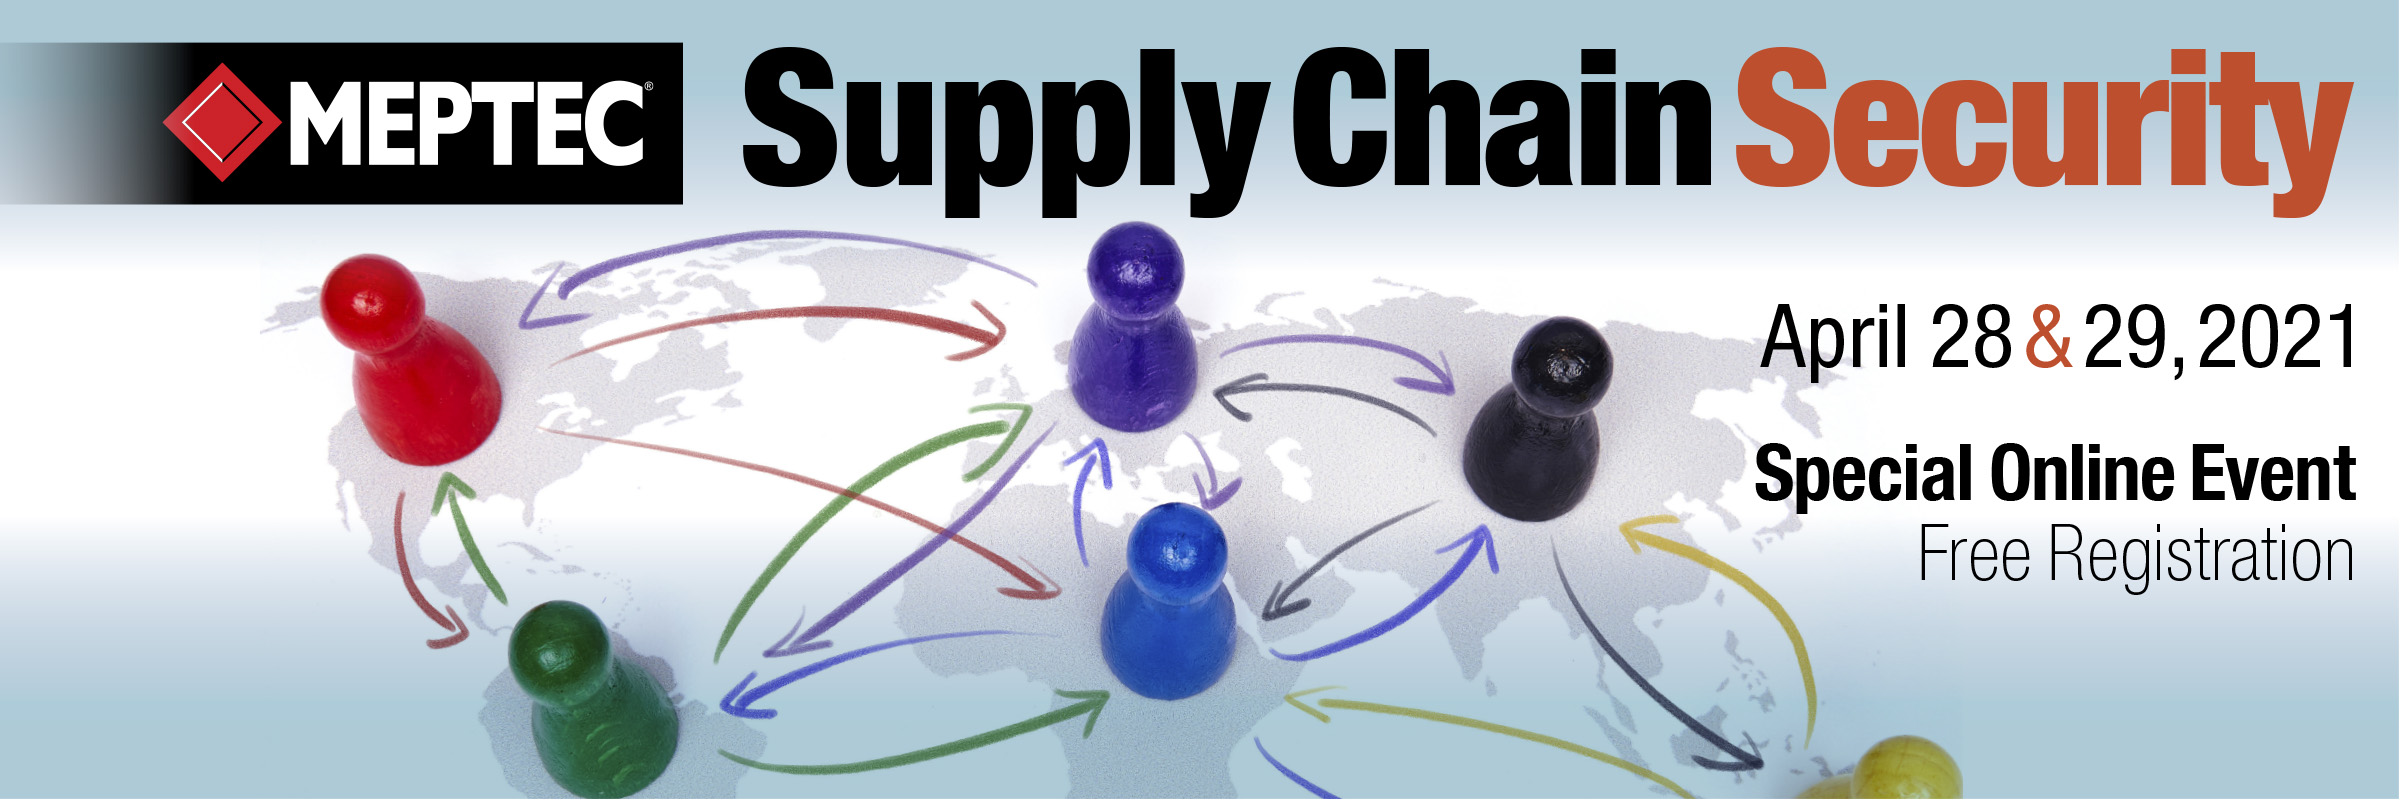 Featured image for “Supply Chain Security 2021”